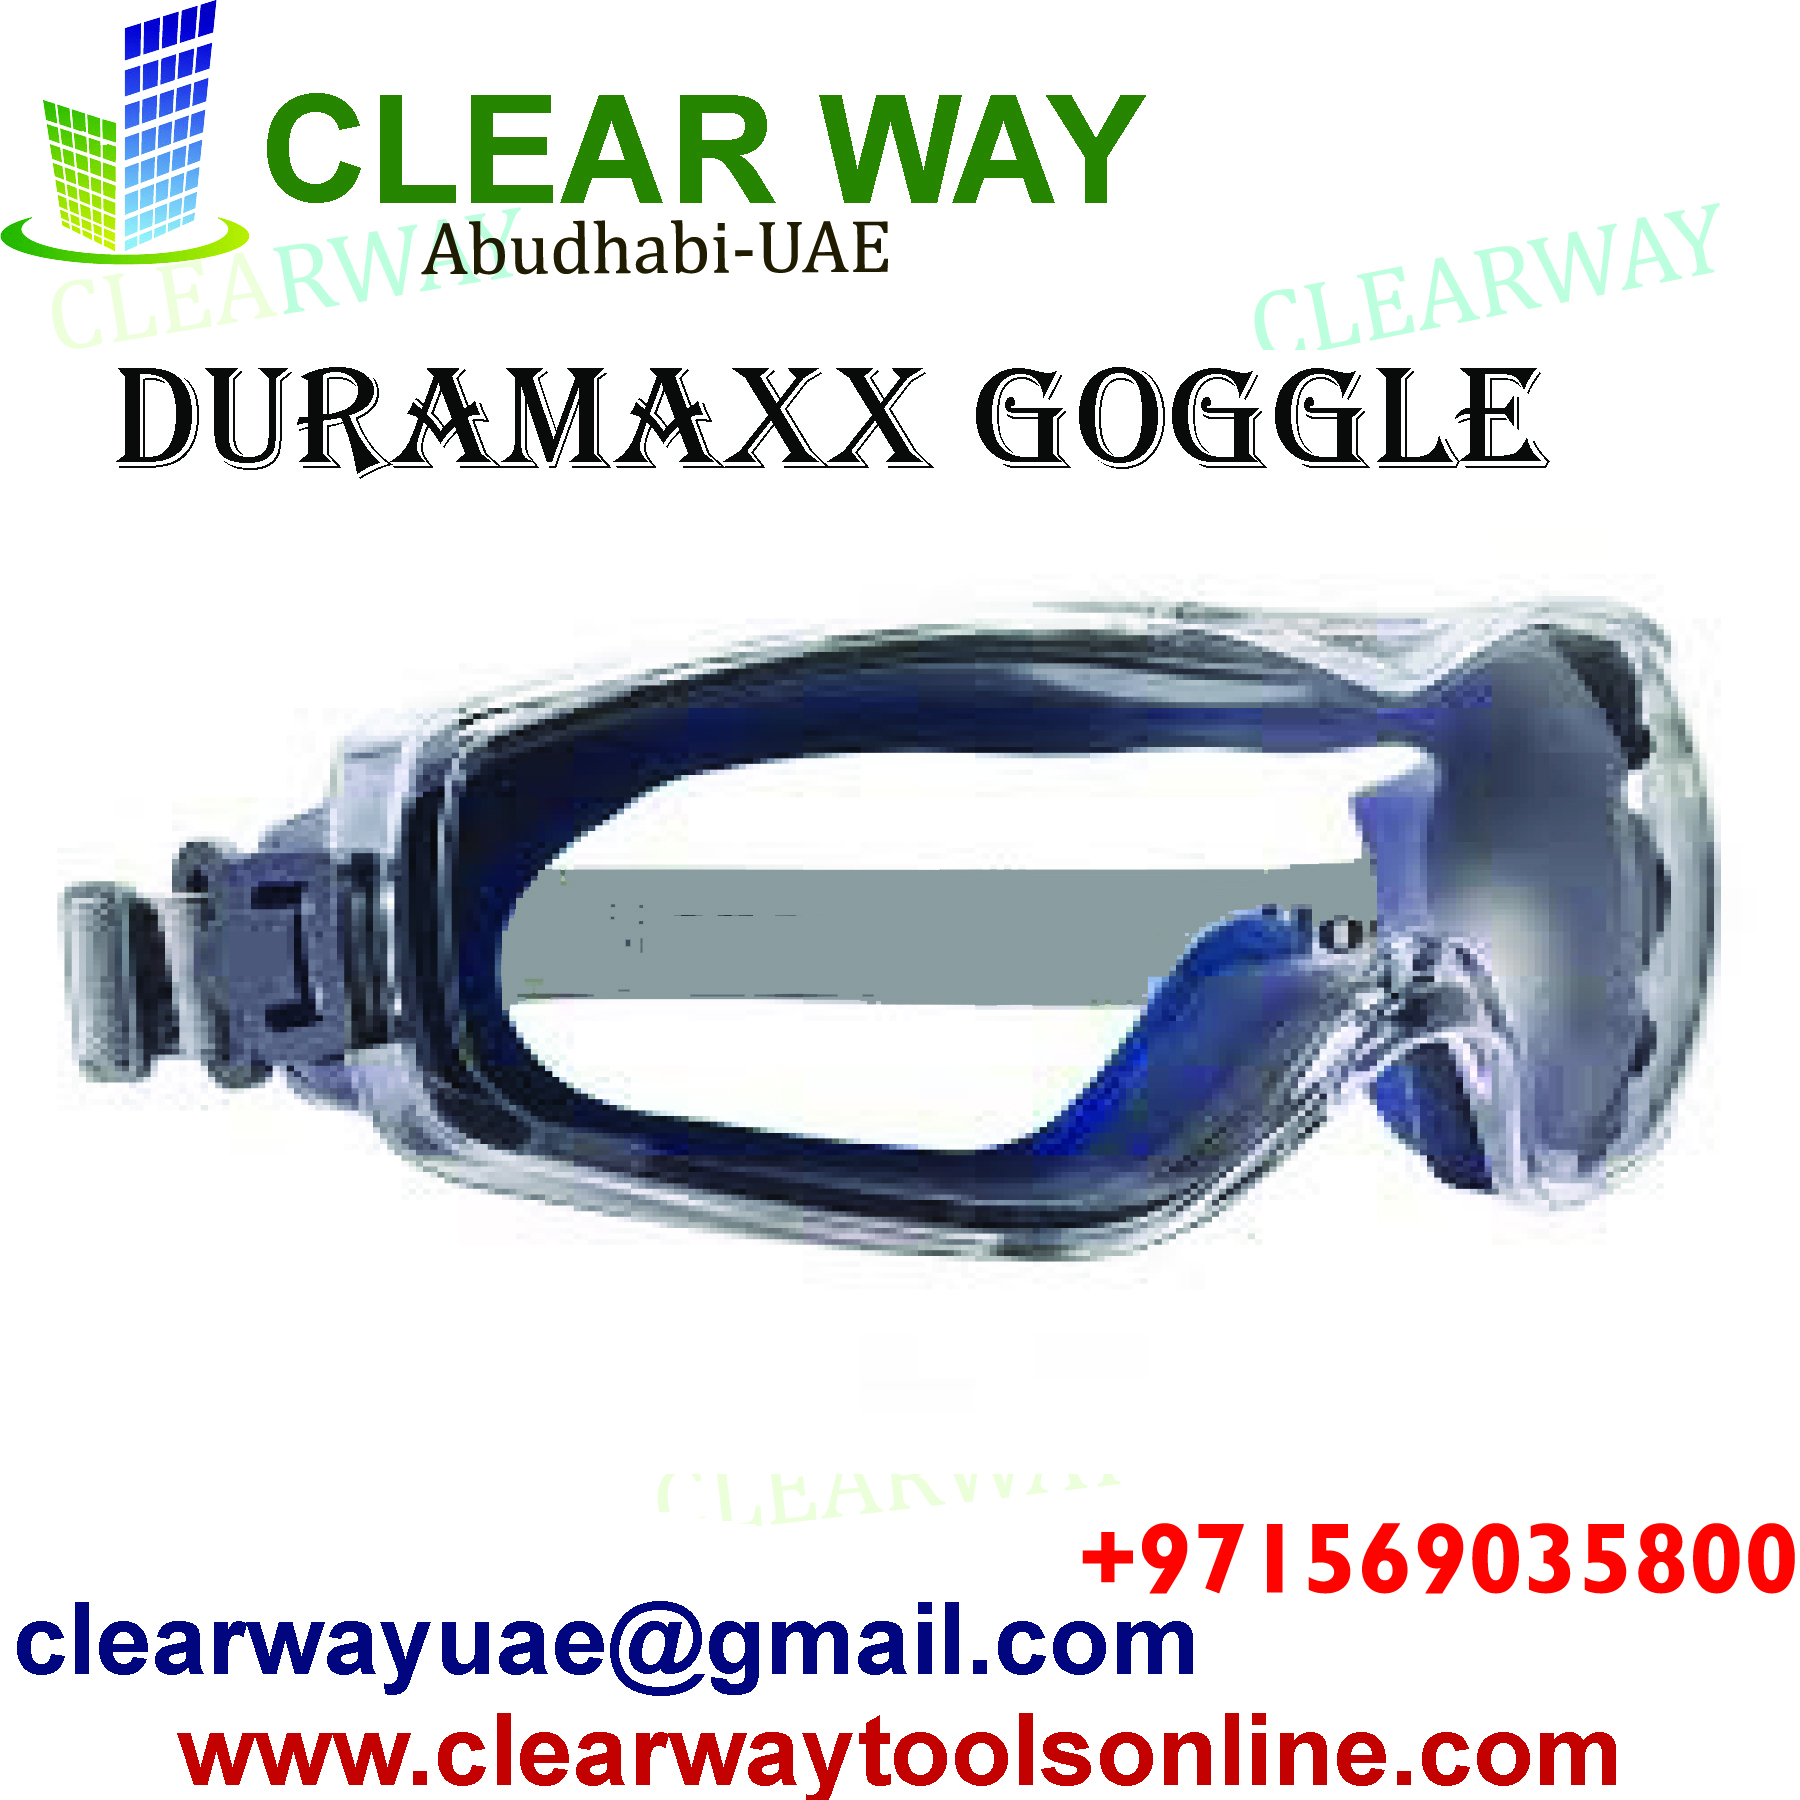 DURAMAXX-GOGGLE-SAFETY-PRODUCTS-CLEARWAY-MUSSAFAH-ABUDHABI-UAE